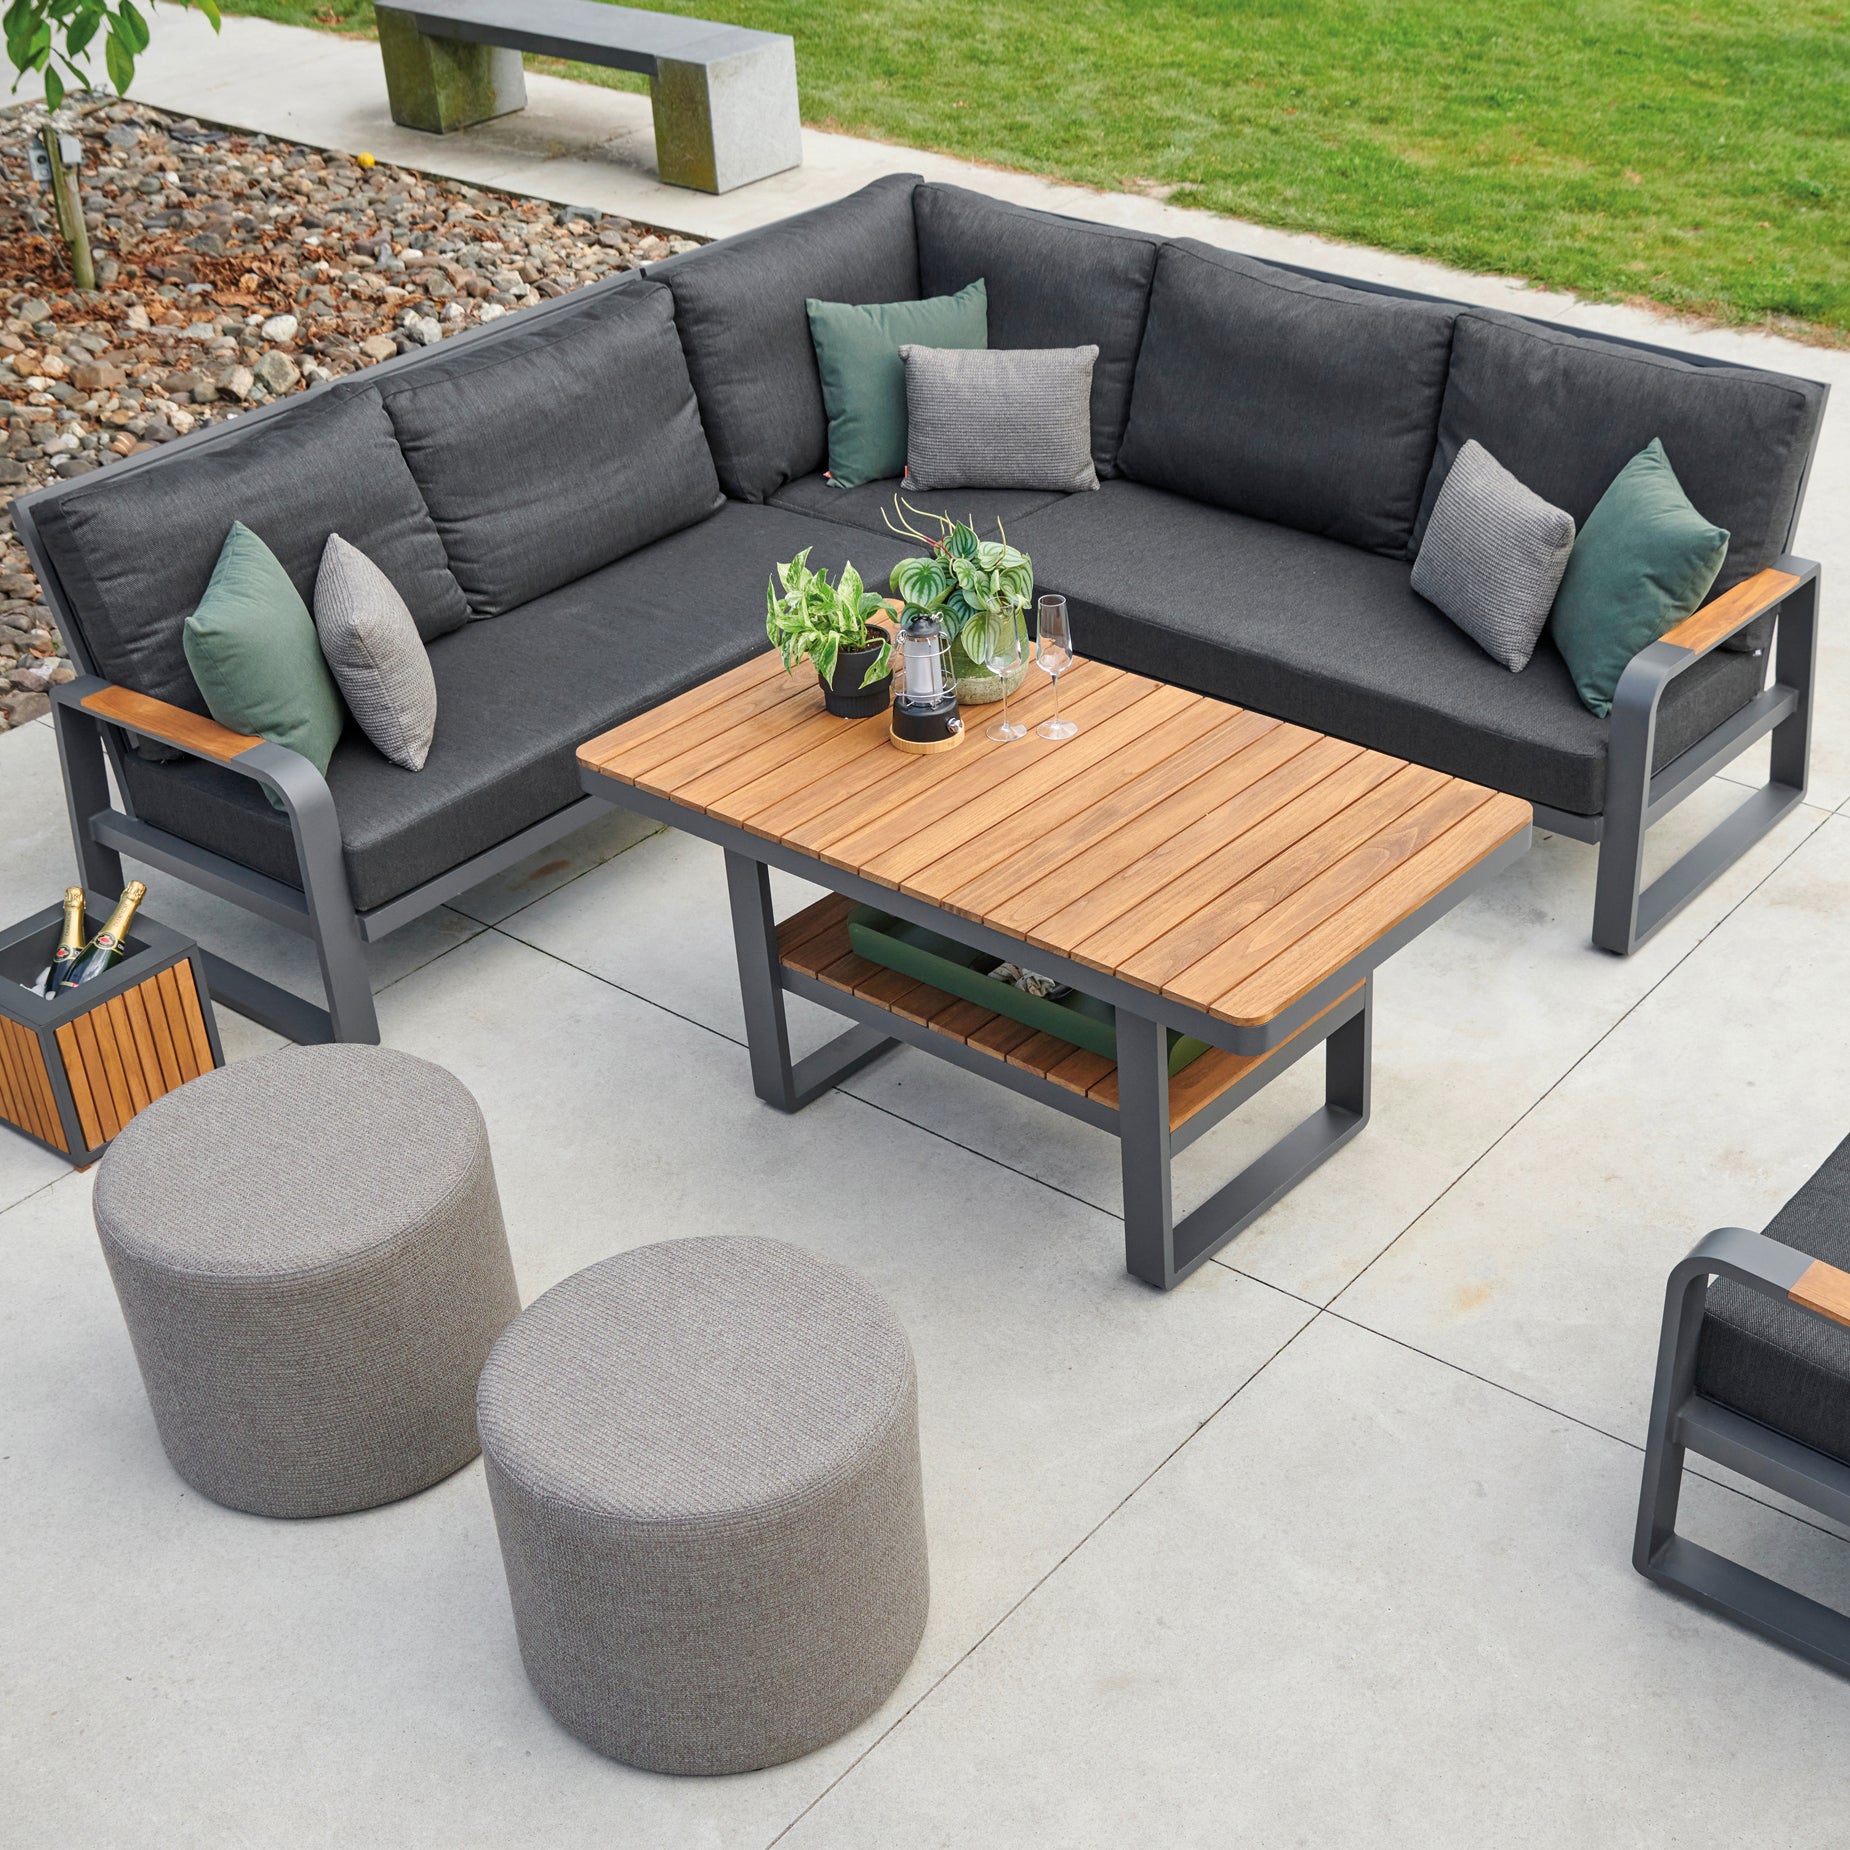 The Montana Corner Sectional features FSC certified Brazilian teak components, Sunbrella cushions and weatherproof powder coated aluminum construction in a sectional set-up that makes coordinating your outdoor space a snap 